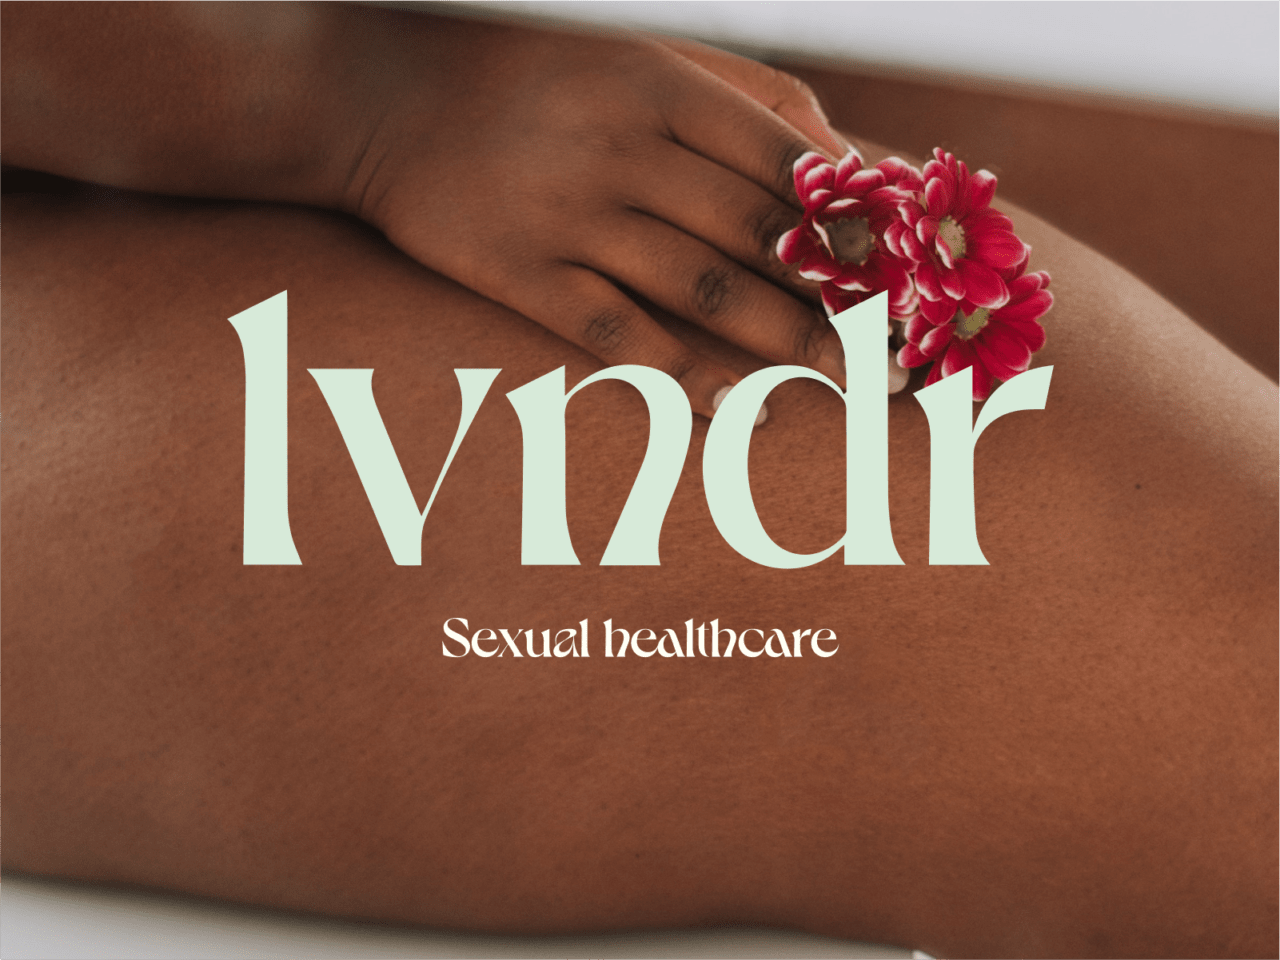 Non-gendered person holding a flower. Caption reads: LVNDR Sexual healthcare